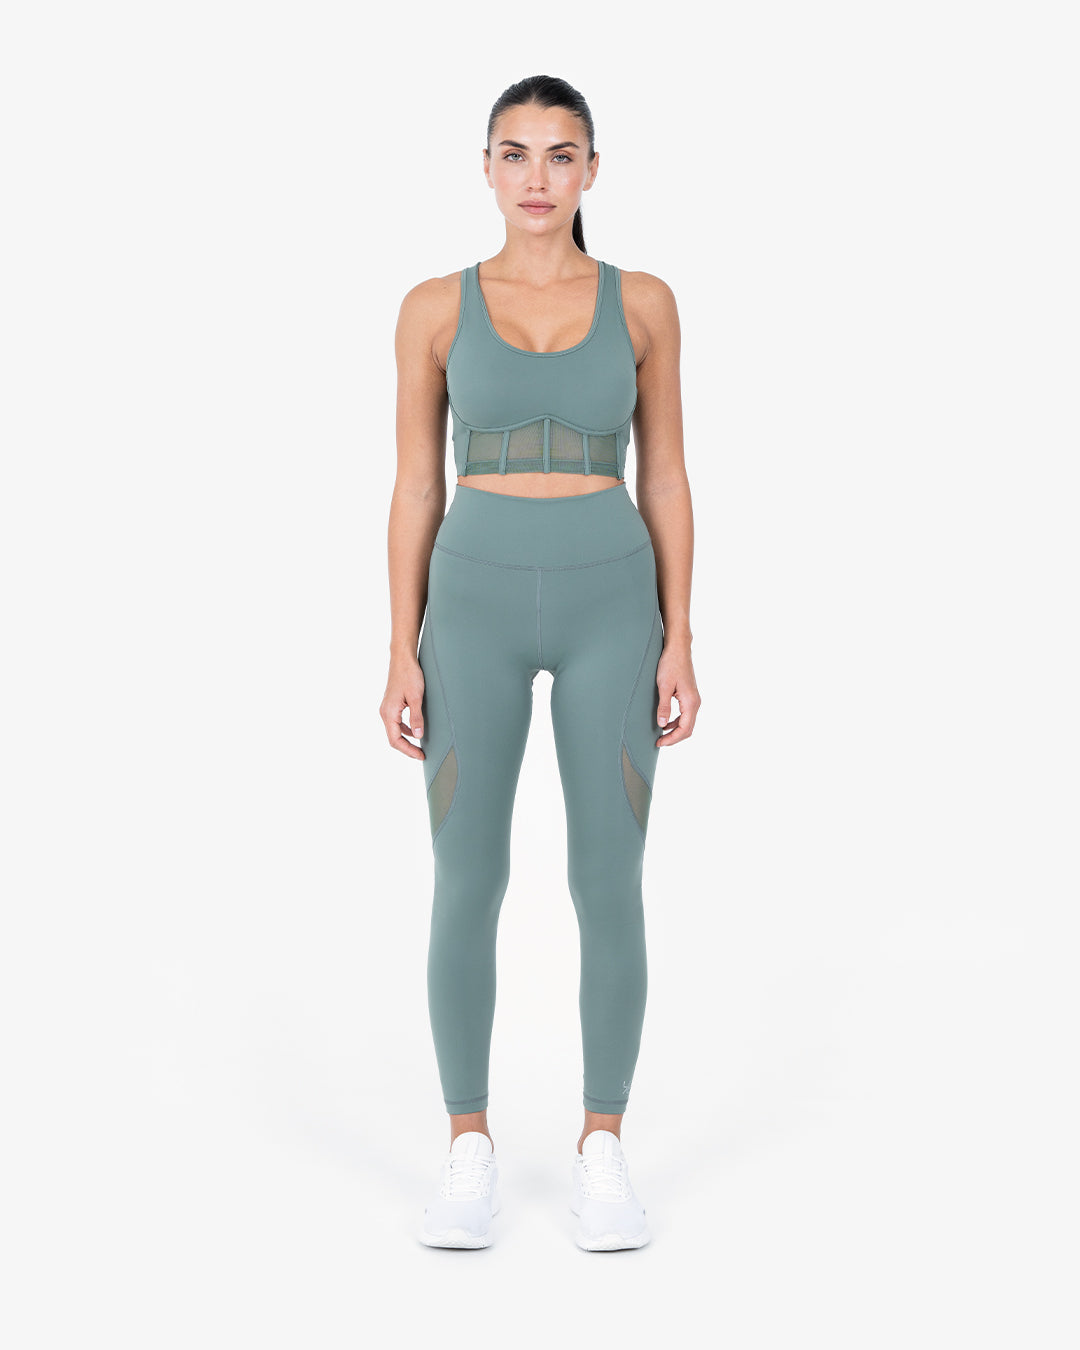 L'COUTURE Leggings Glide Active Mesh Legging Forest Green